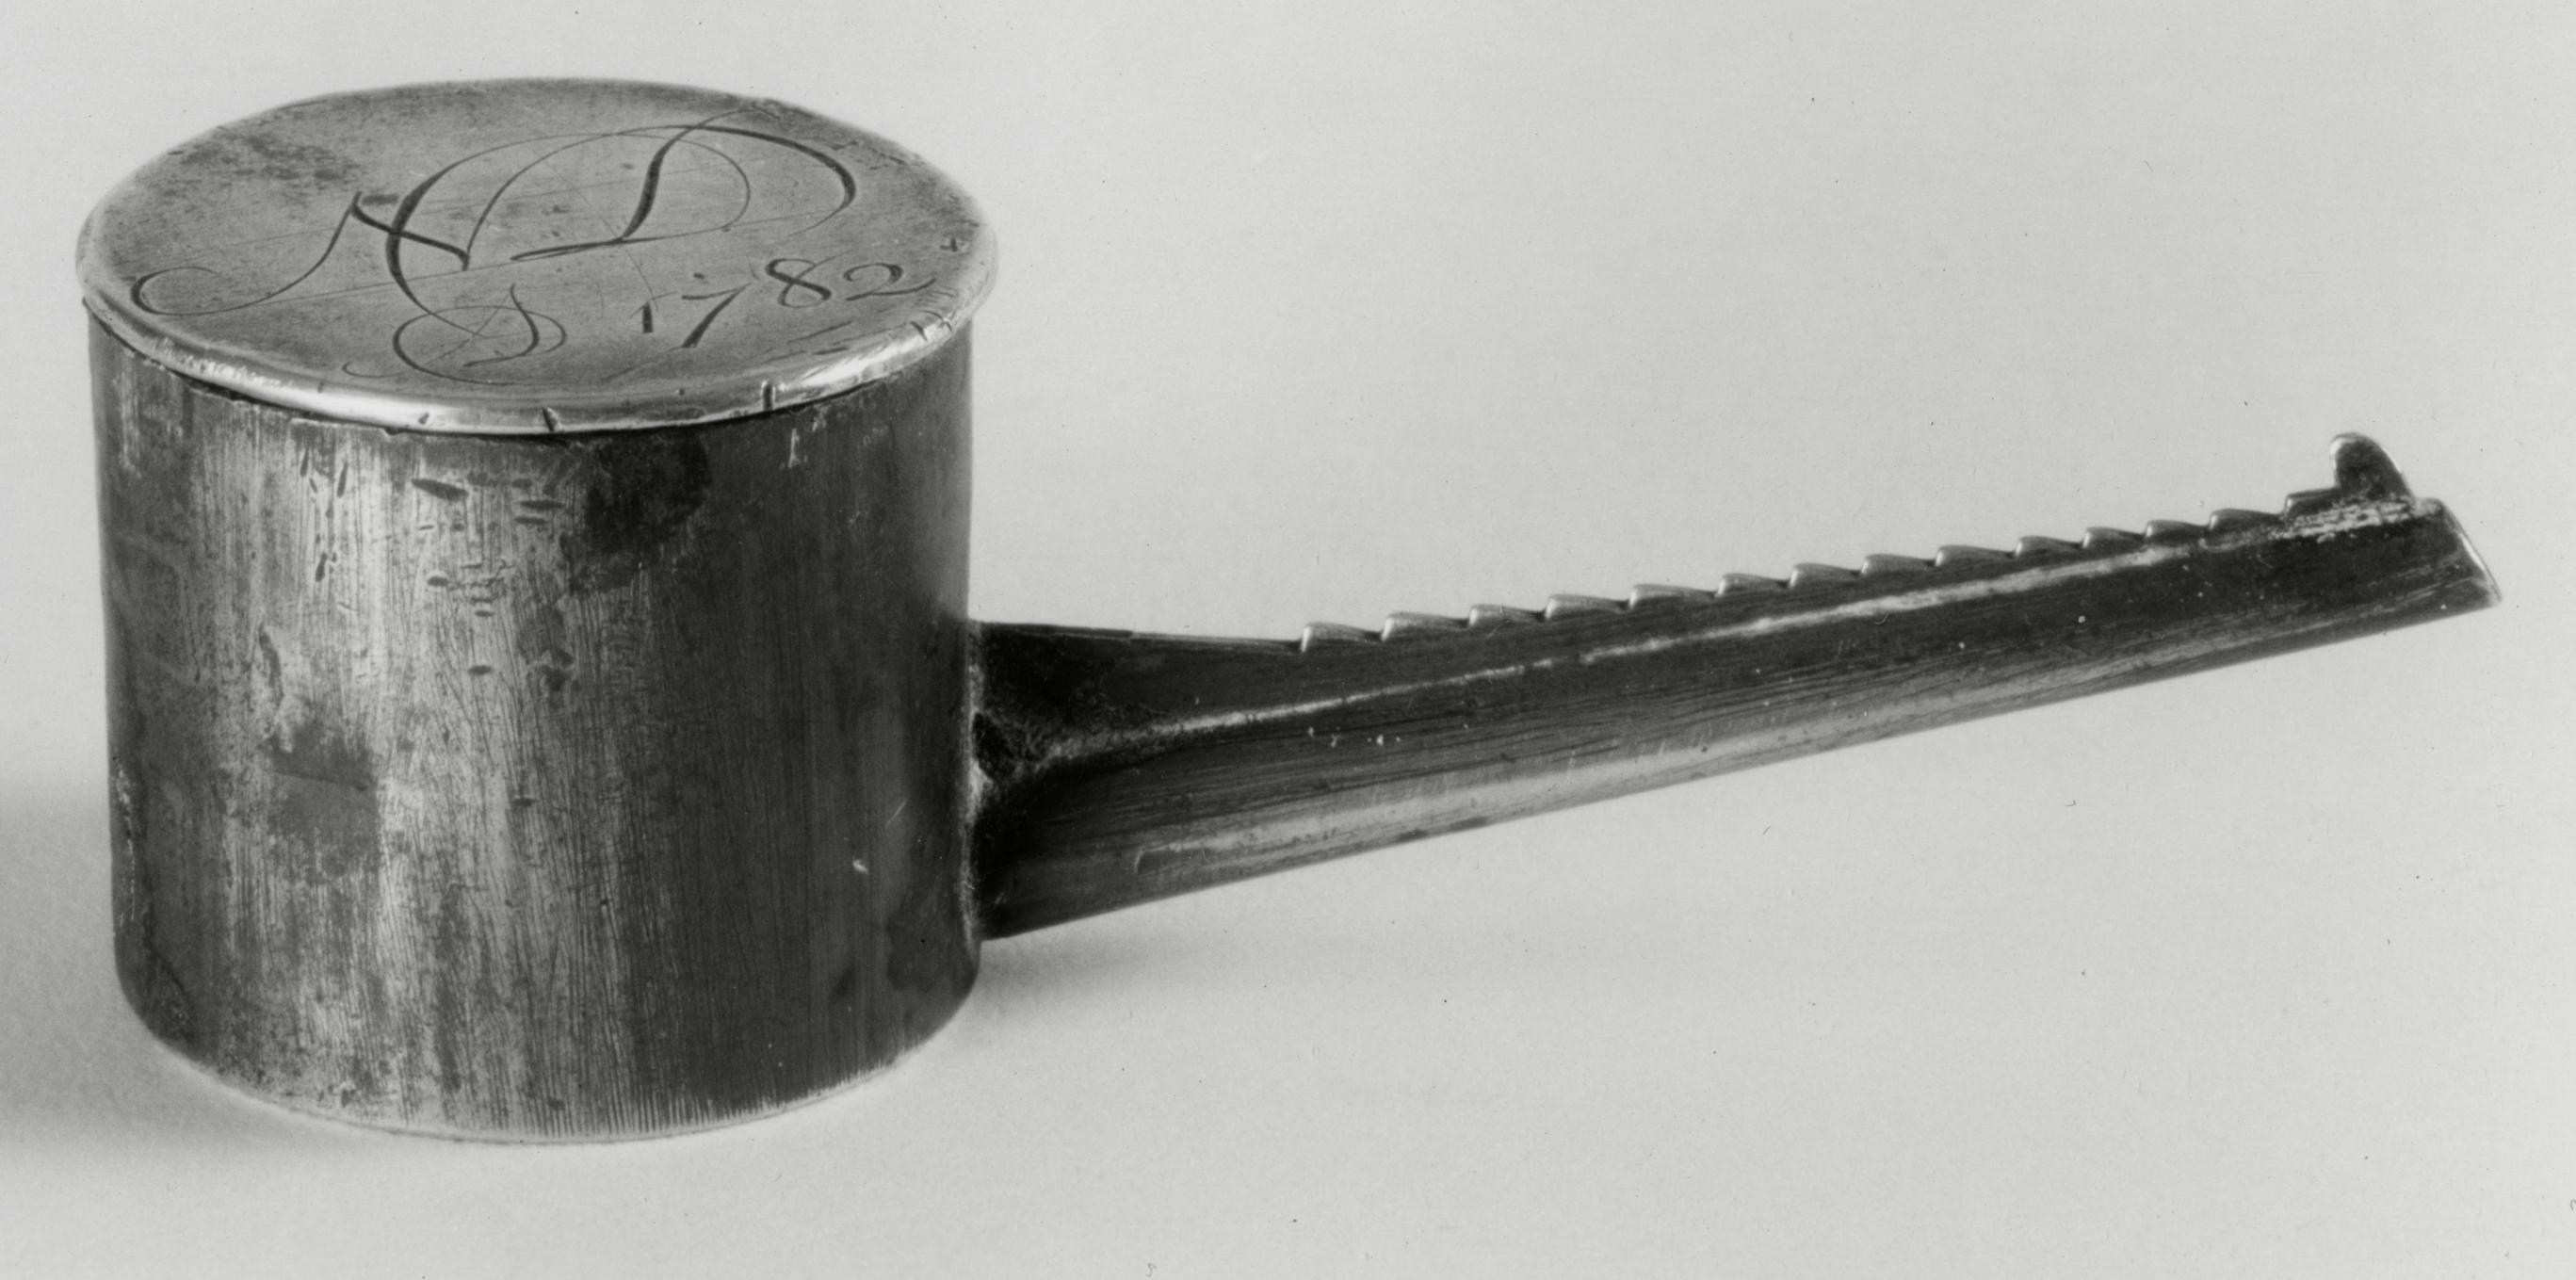 Black and white photograph of a polishing compound container.